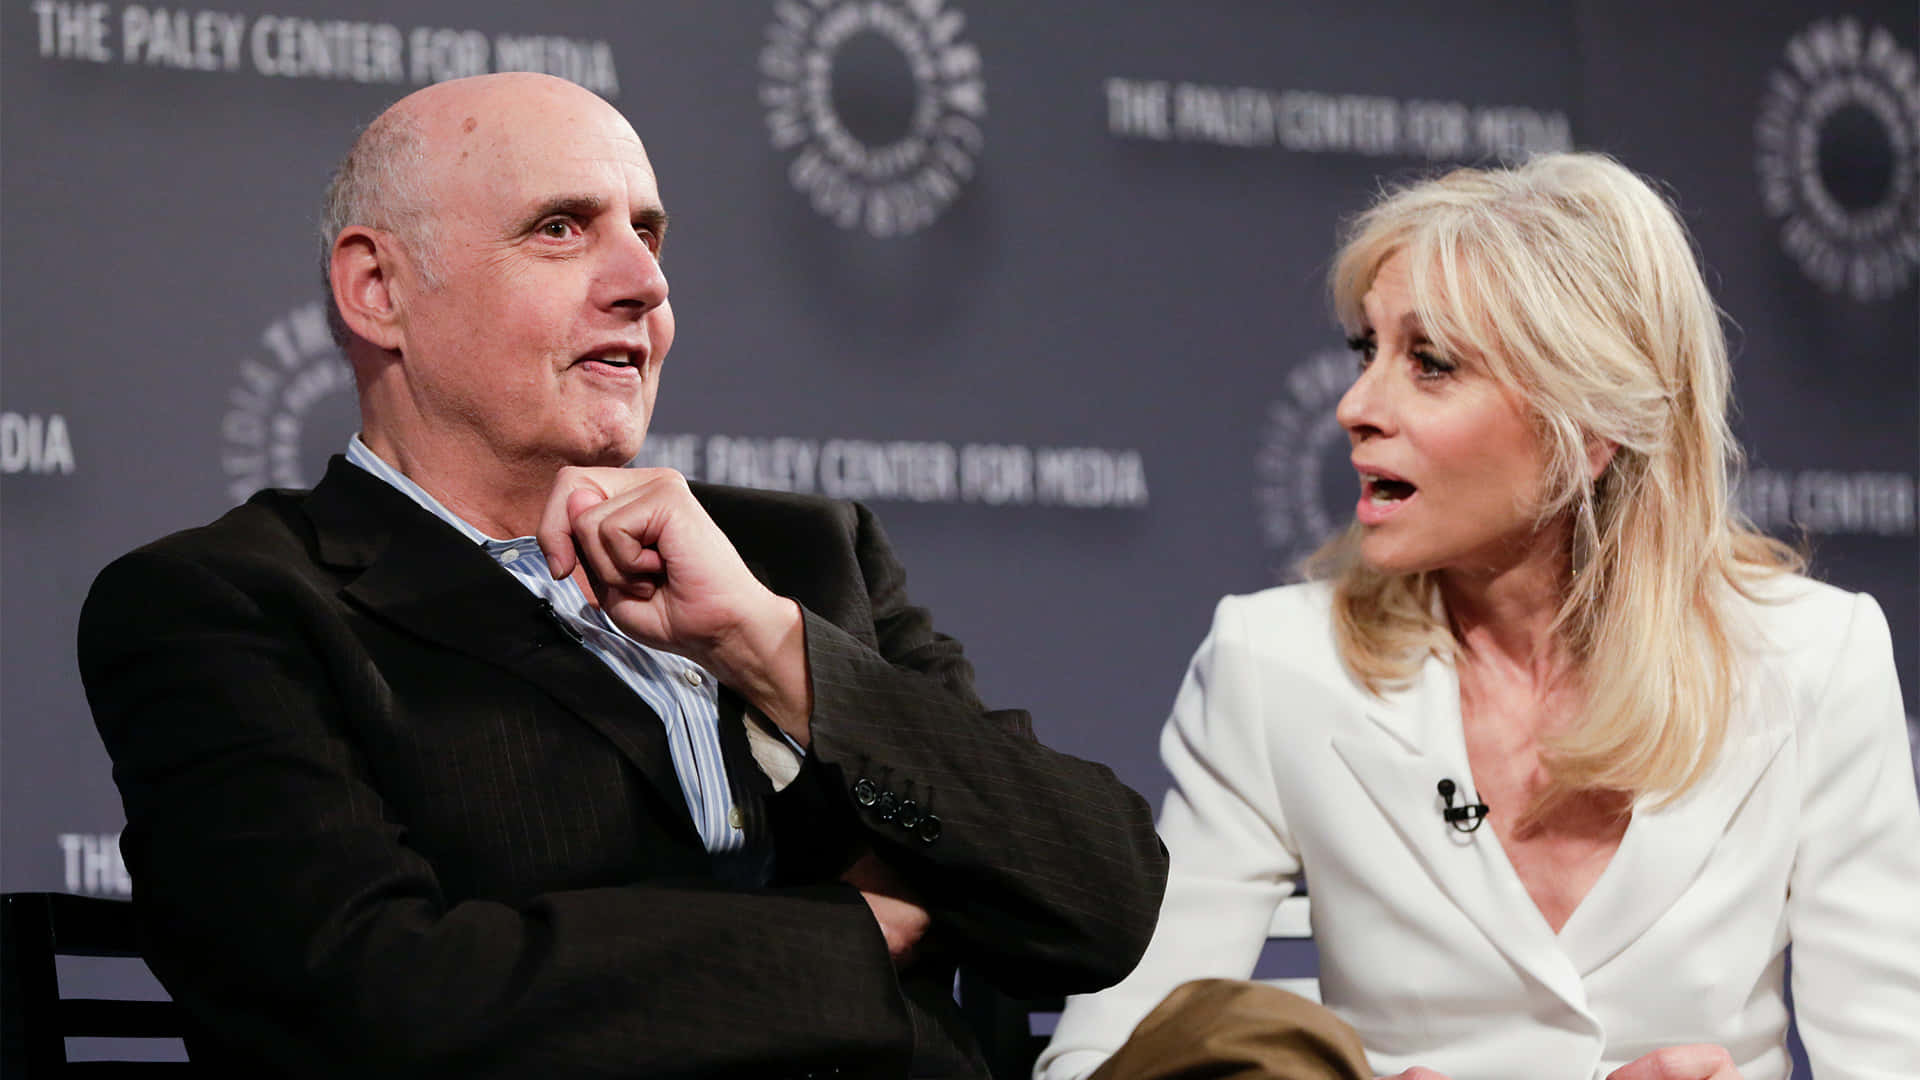 Jeffreytambor Is An Actor Known For His Roles In Both Film And Television. He Is Best Known For His Portrayal Of Maura Pfefferman In The Amazon Series 